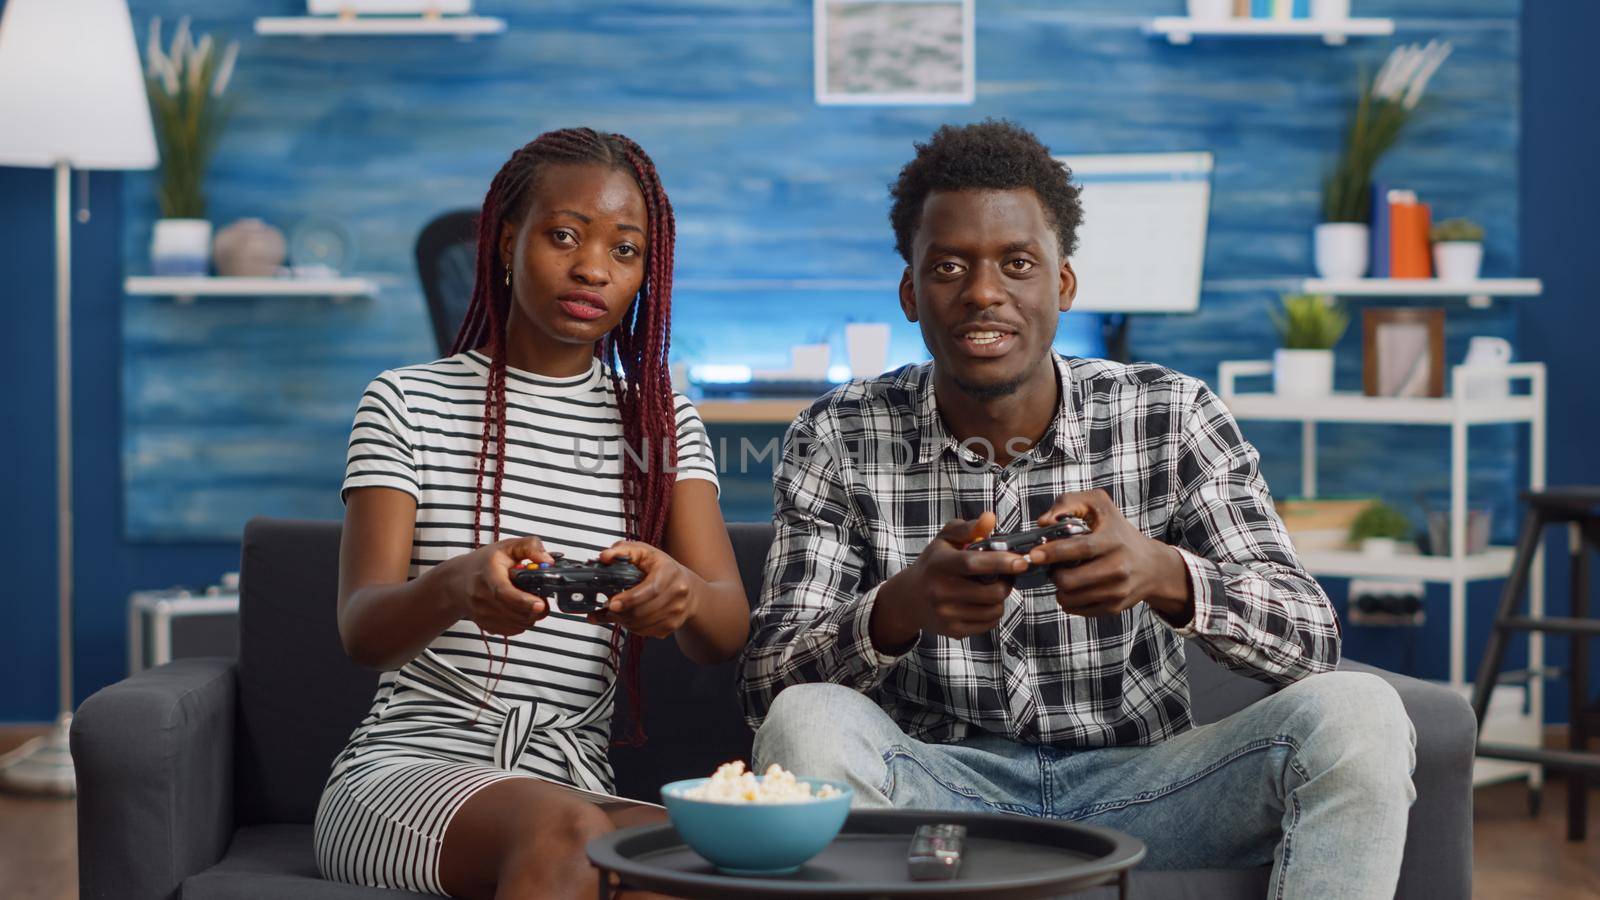 African american couple losing video game match on living room couch. Black people playing with console, controller, and television for fun activity and relaxation. Partners sitting together